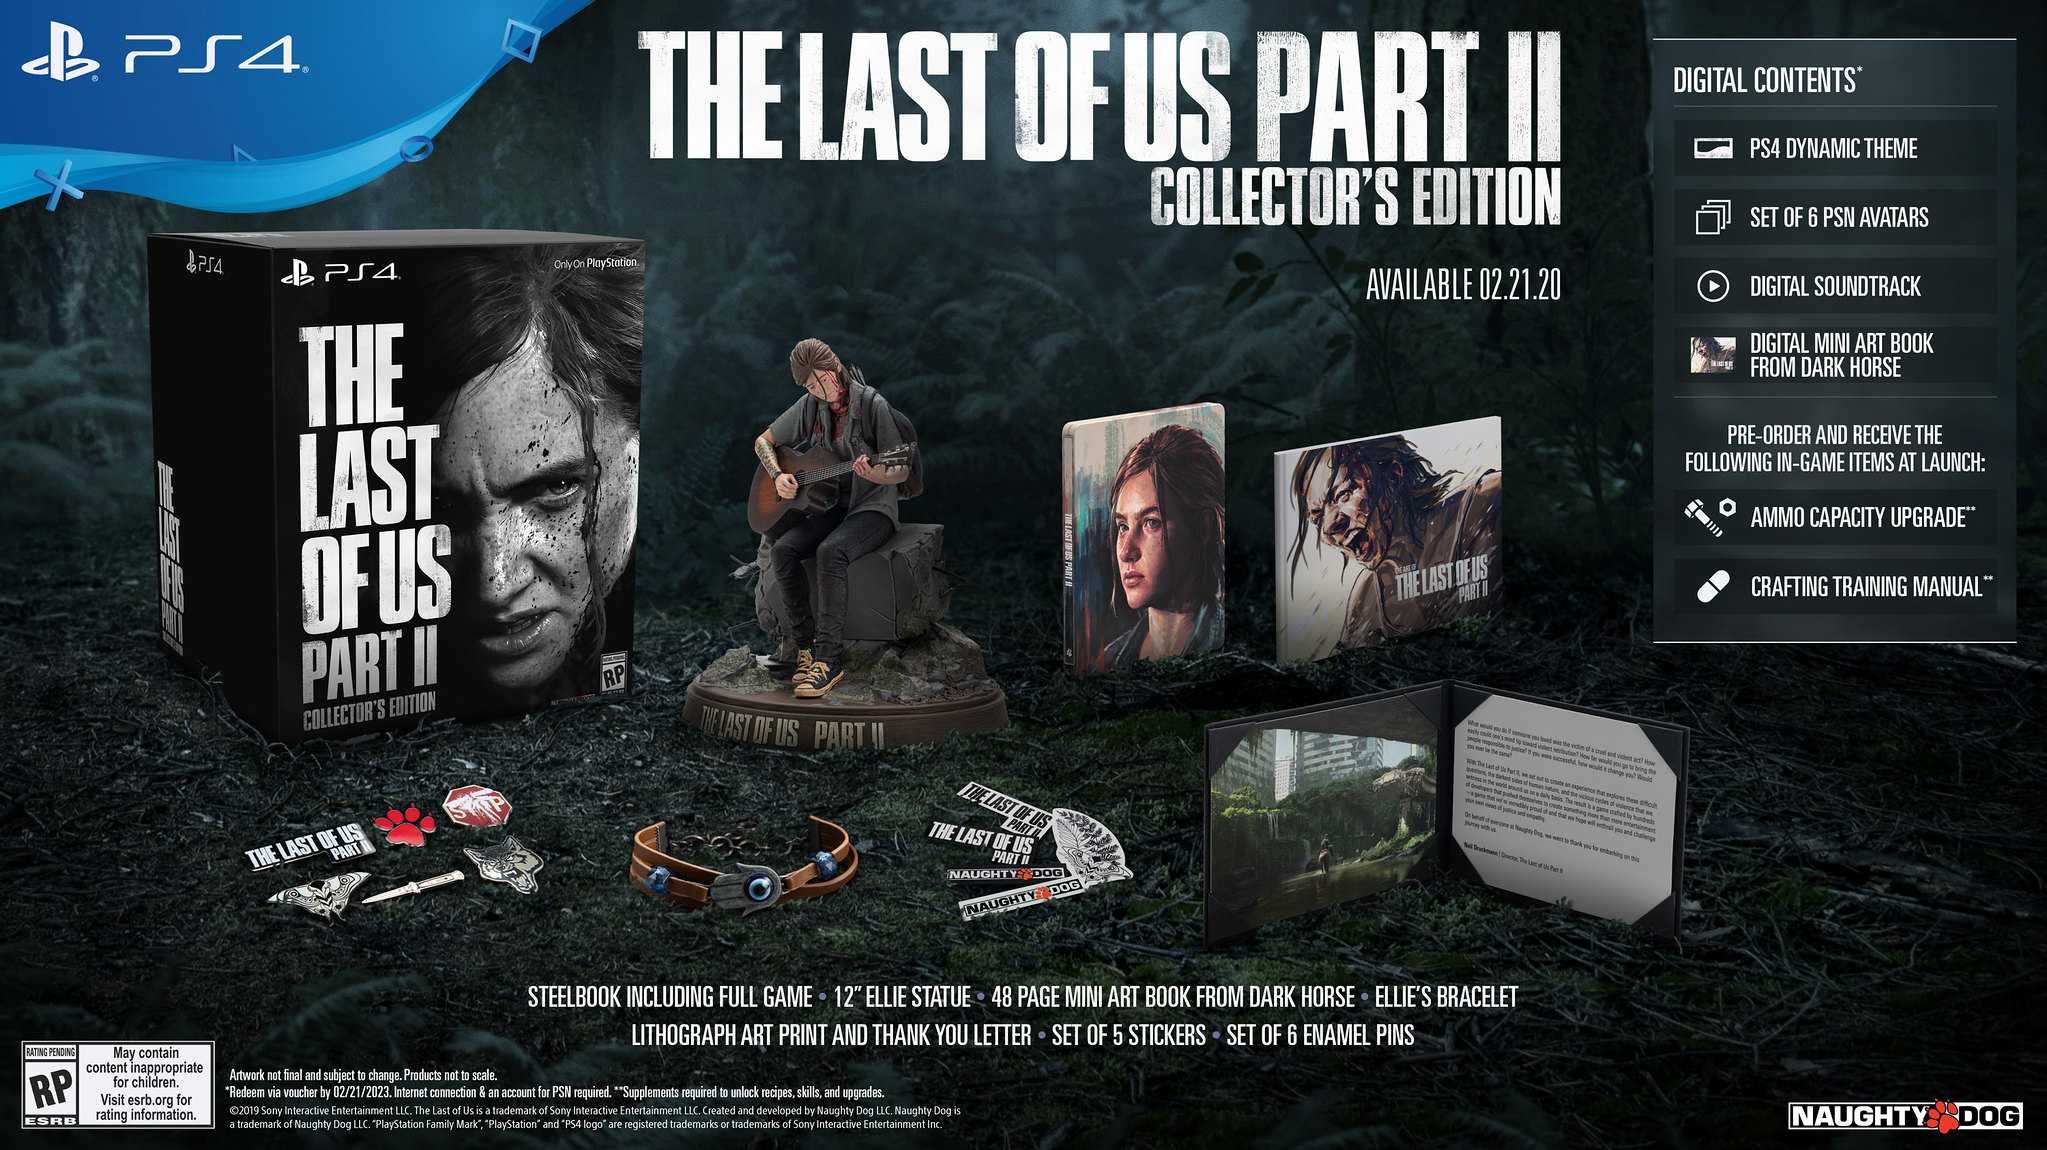 The Last of Us Part 2 Collector’s Edition